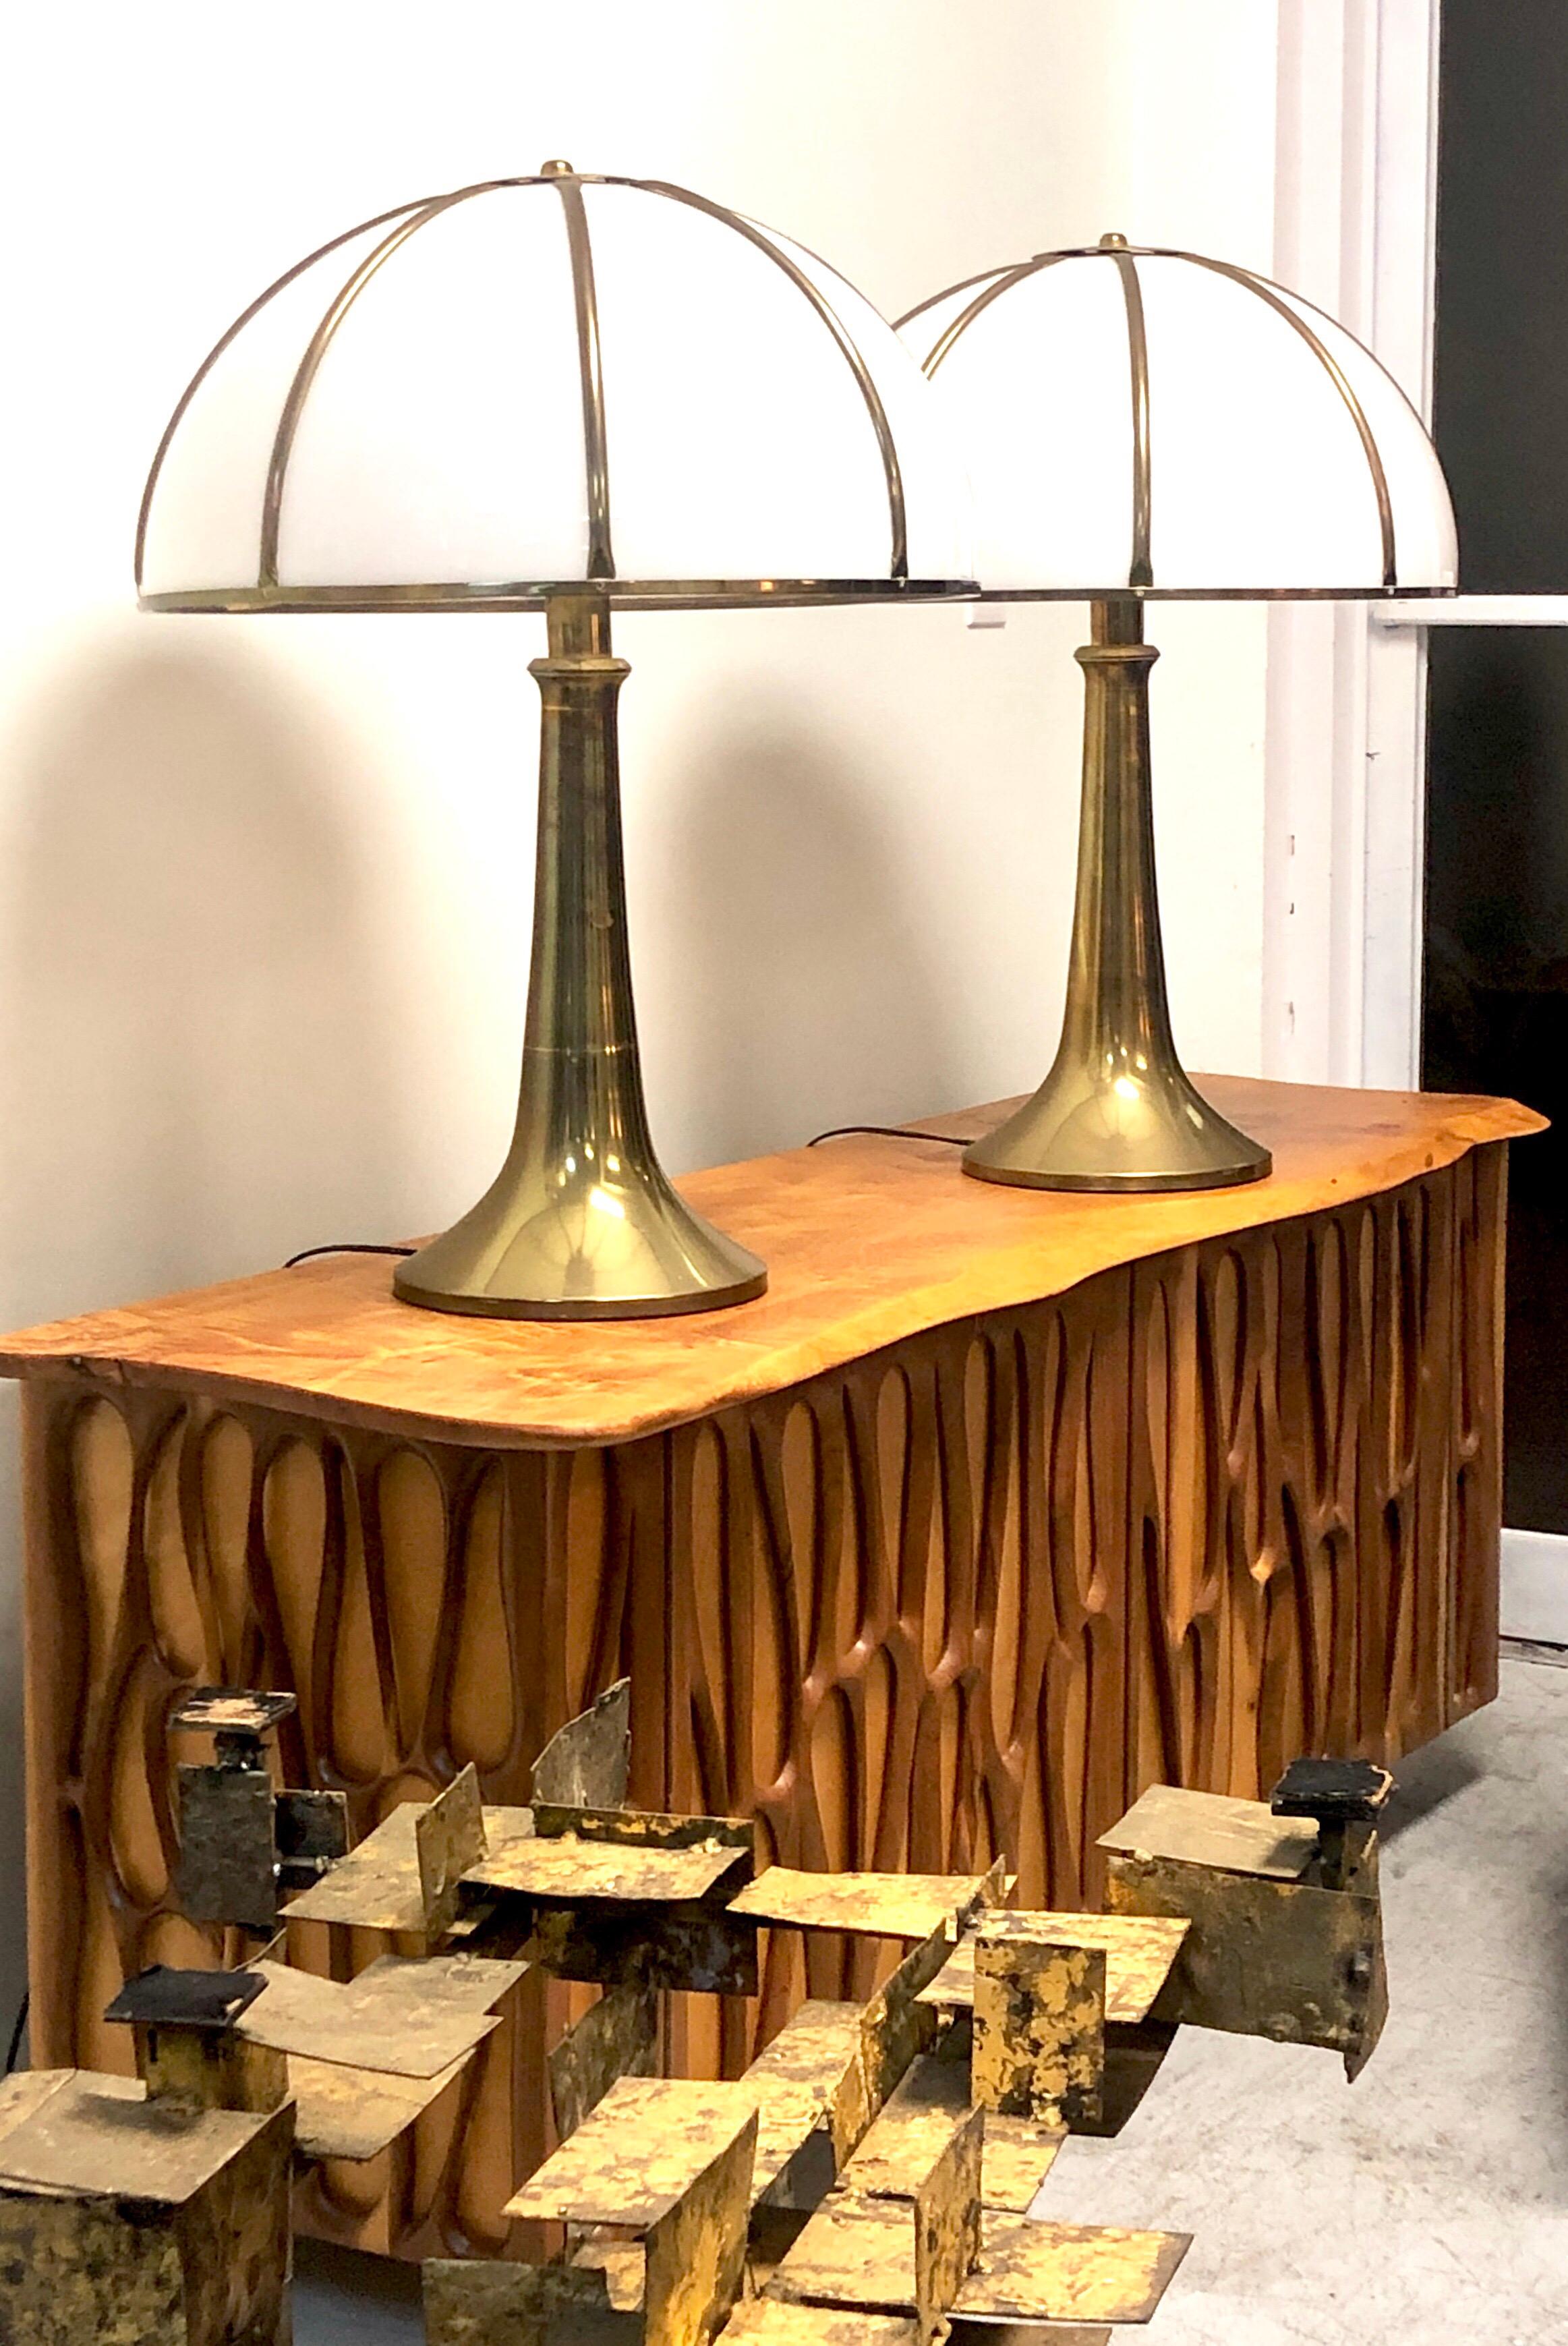 Exquisite pair of large iconic Fungo lamps by Gabriella Crespi. Brass body with Plexiglas dome shades. Both signed on bases and shades. Impeccable provenance and certification from the Gabriella Crespi Archivio.